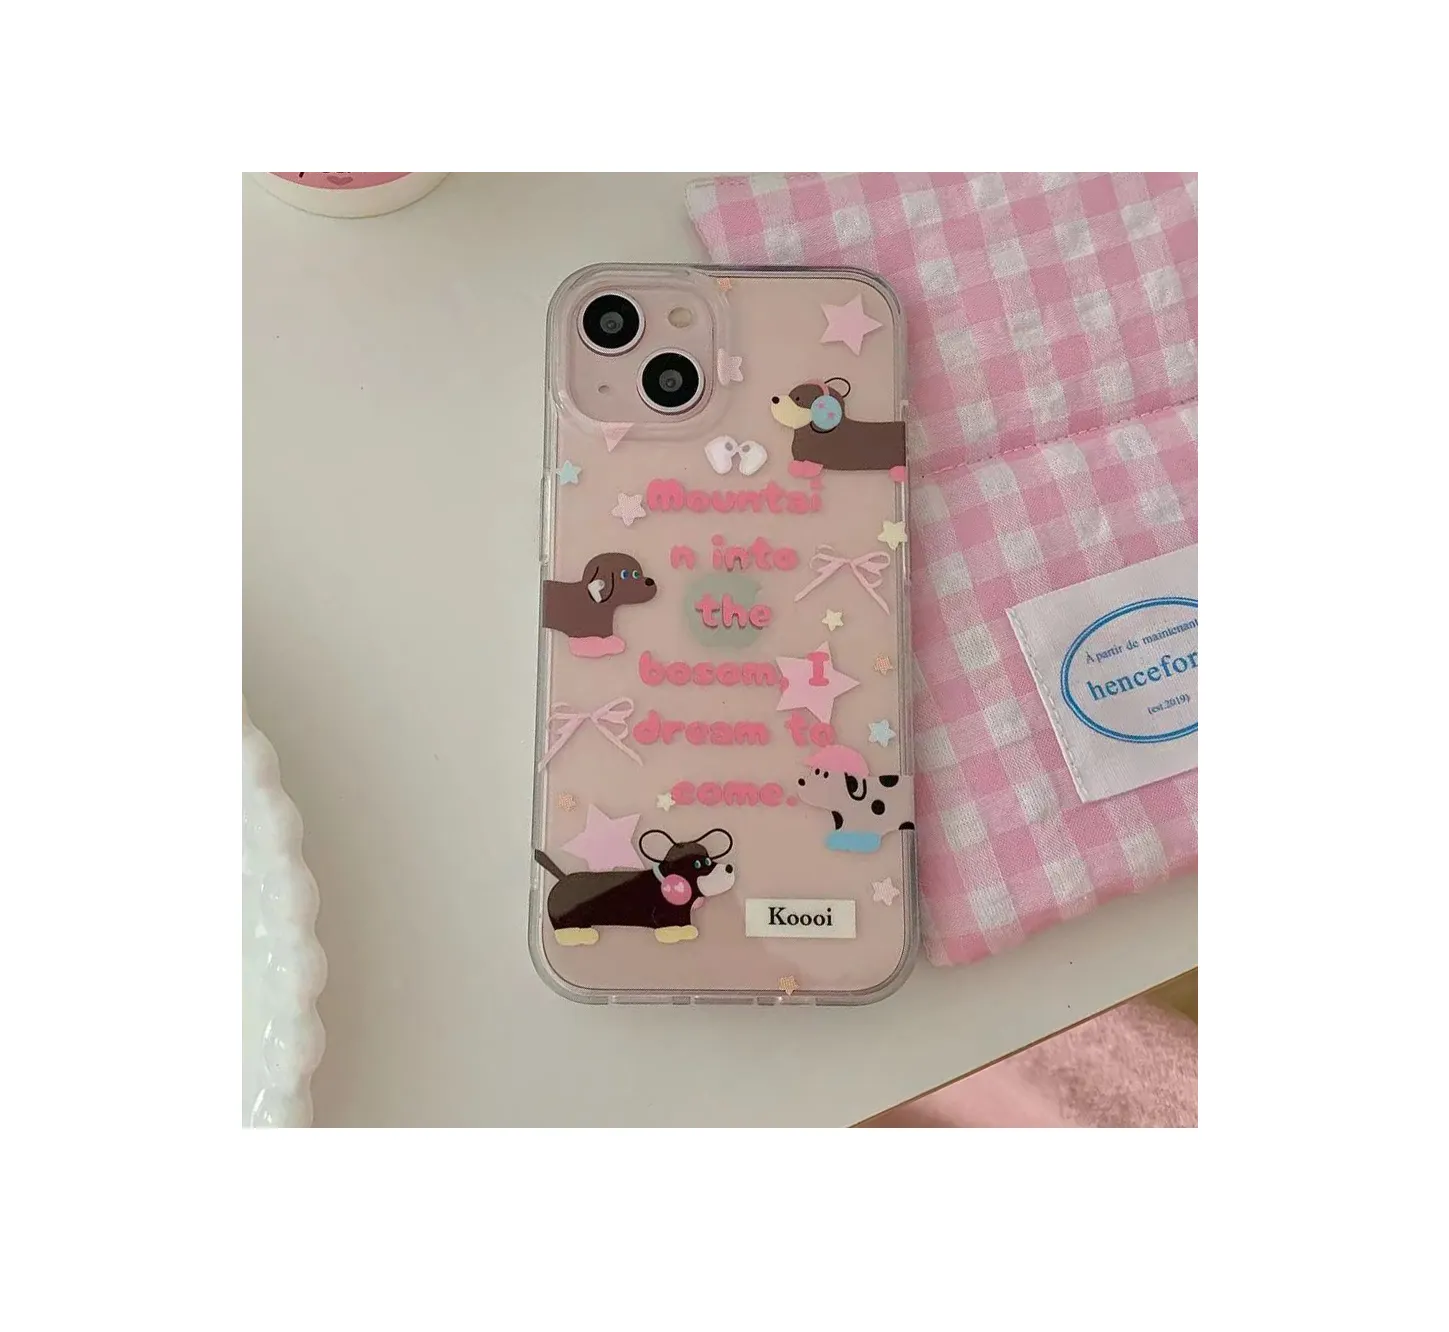 Shanhui Cute Pink Dog Phone Case for Girls Waterproof Imd Material Mobile Phone Protector Lovely Design Packaging Included